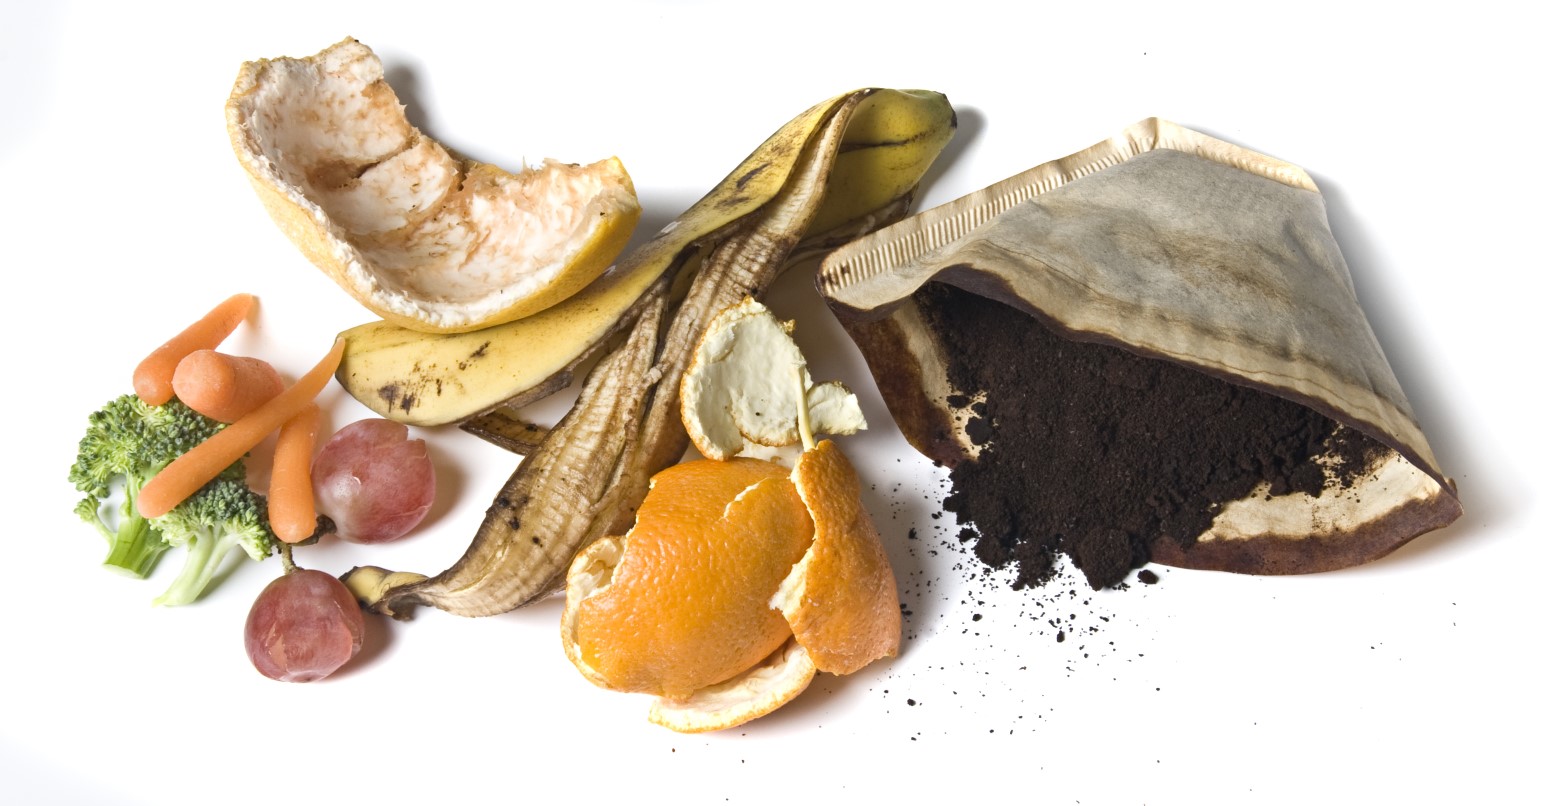 Food scraps like orange peels, coffee filters, other veggies scraps over a white background